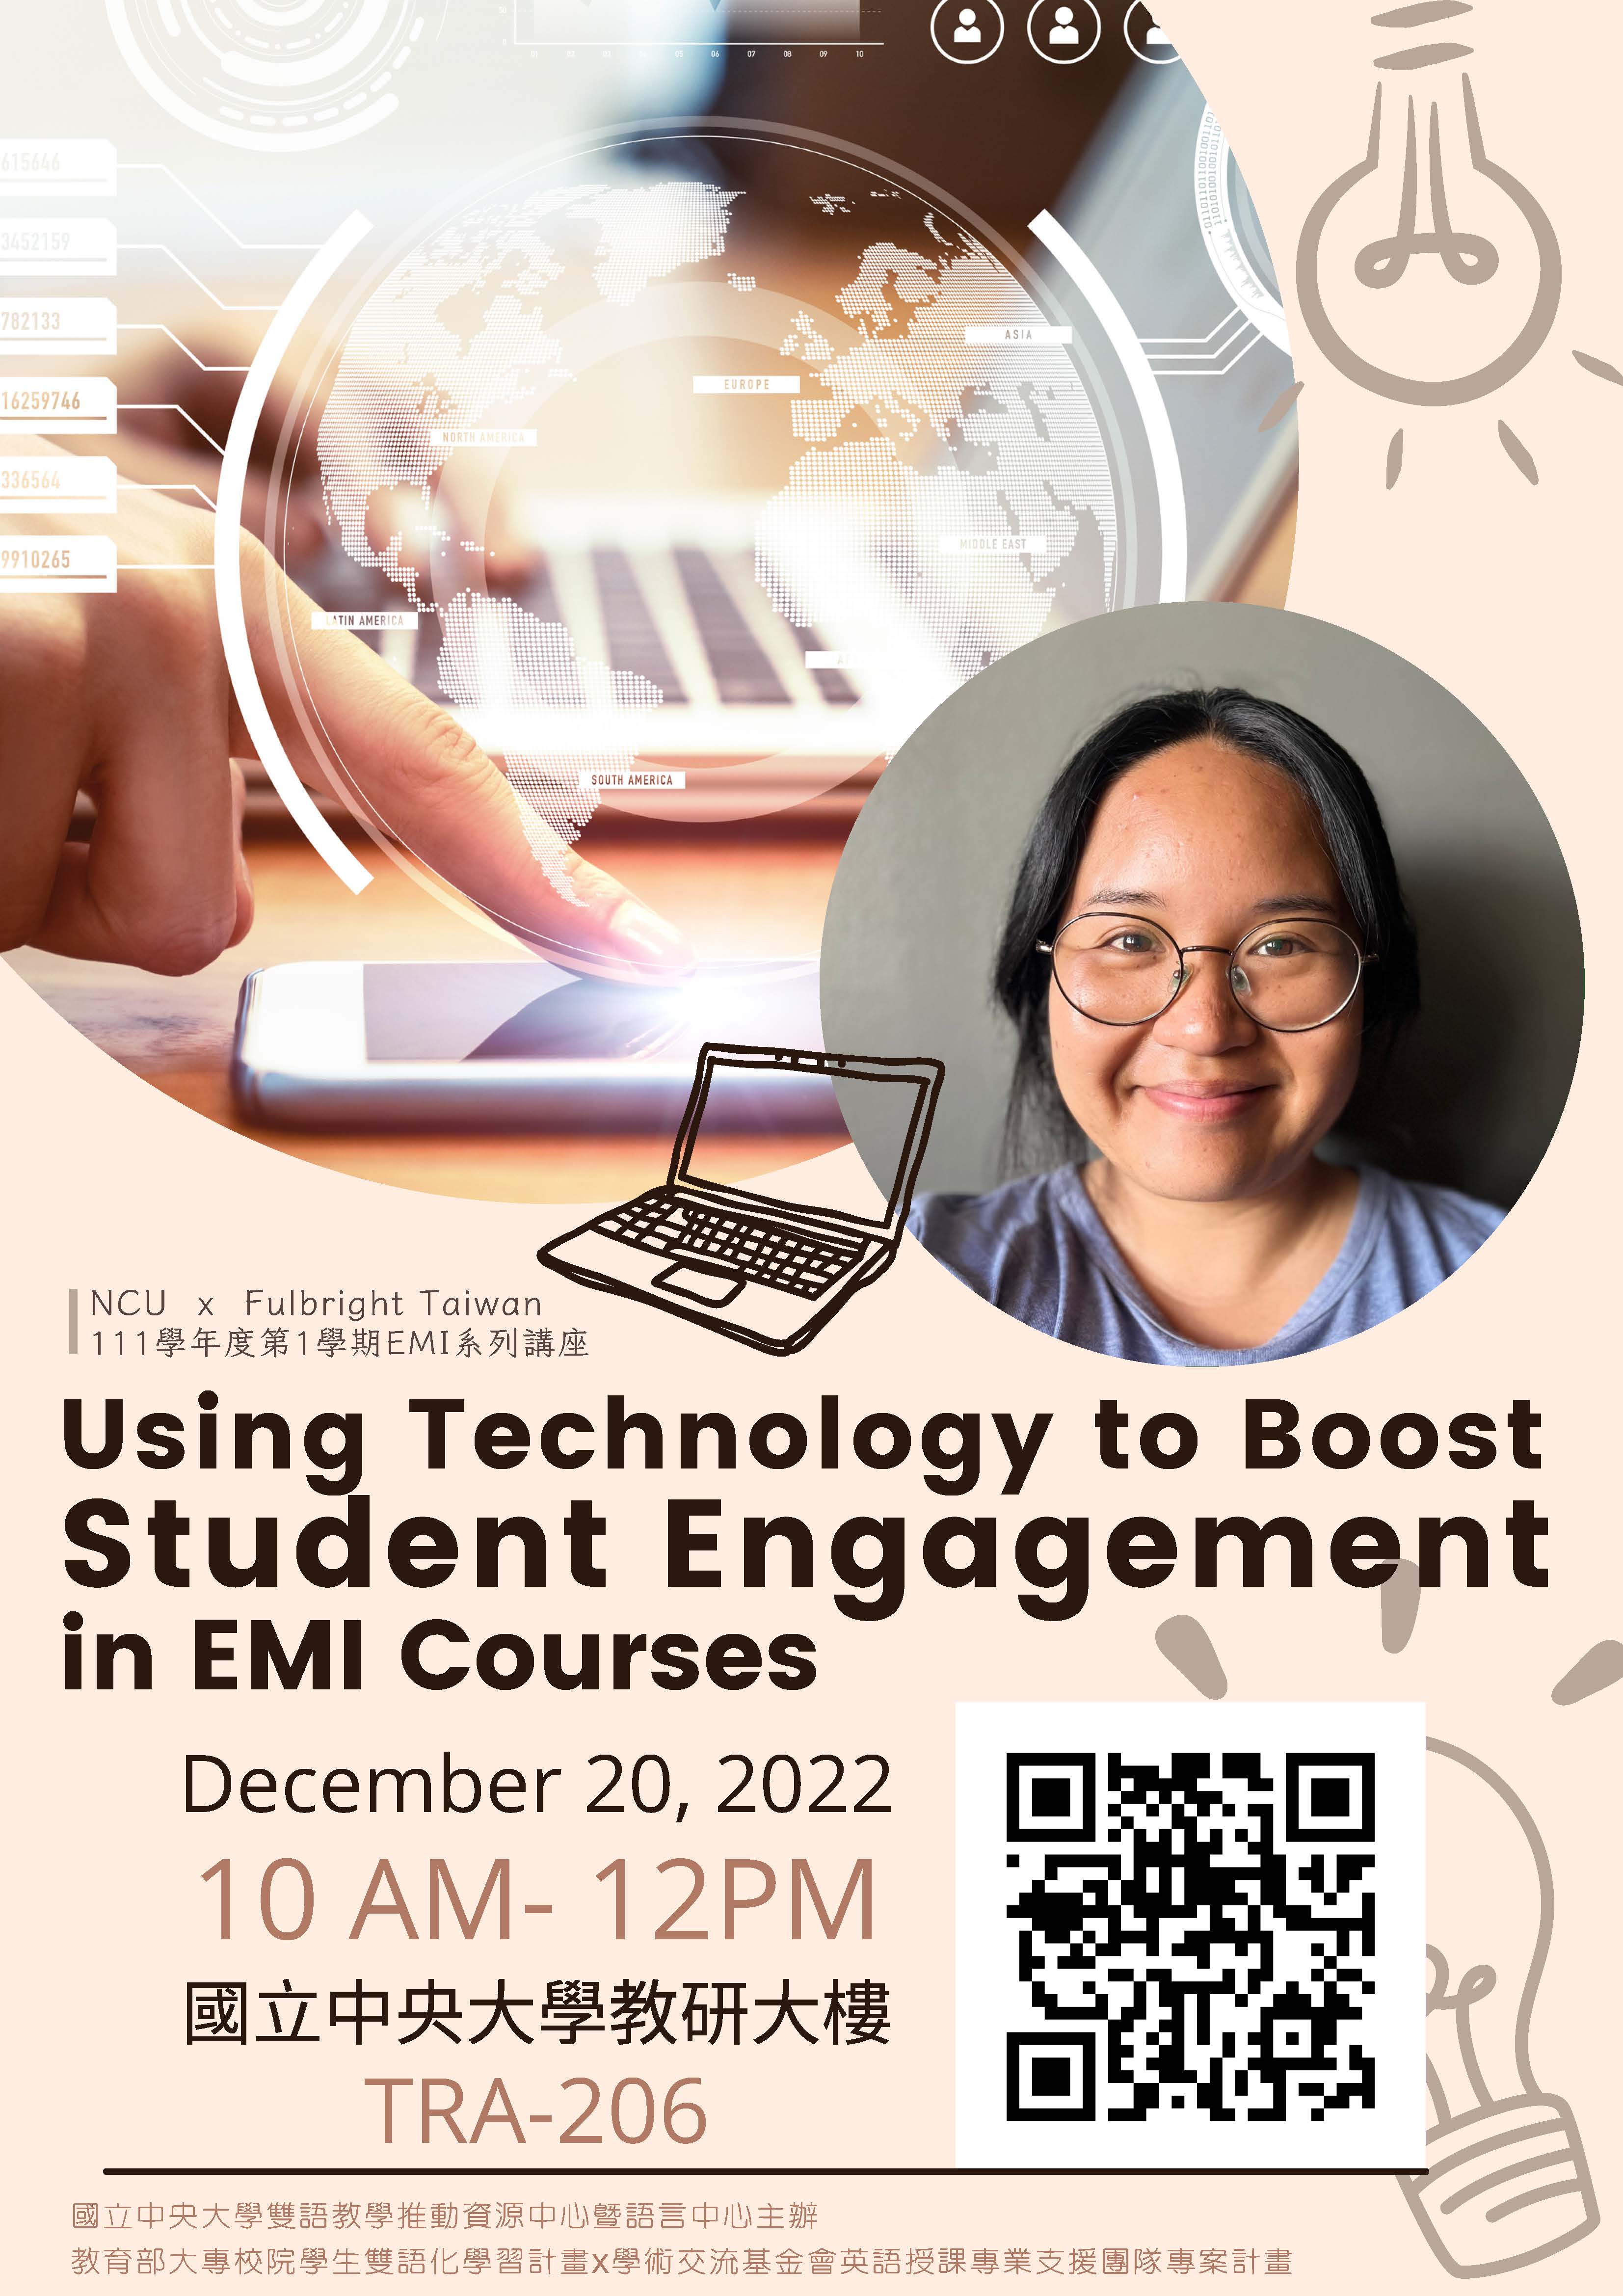 Using Technology to Boost Student Engagement in EMI Courses